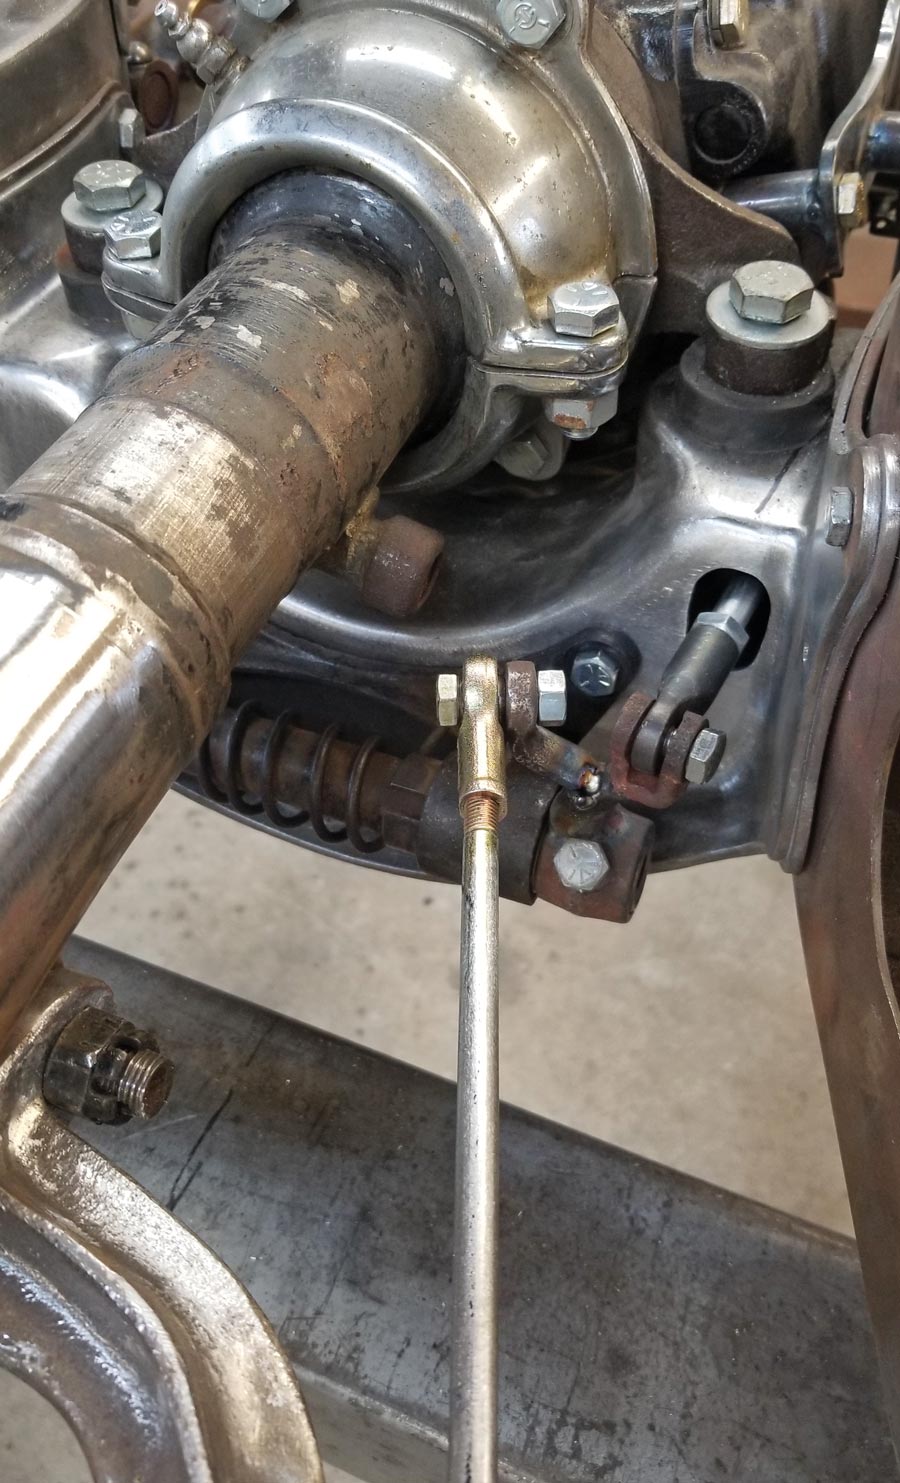 rod from the parking brake handle